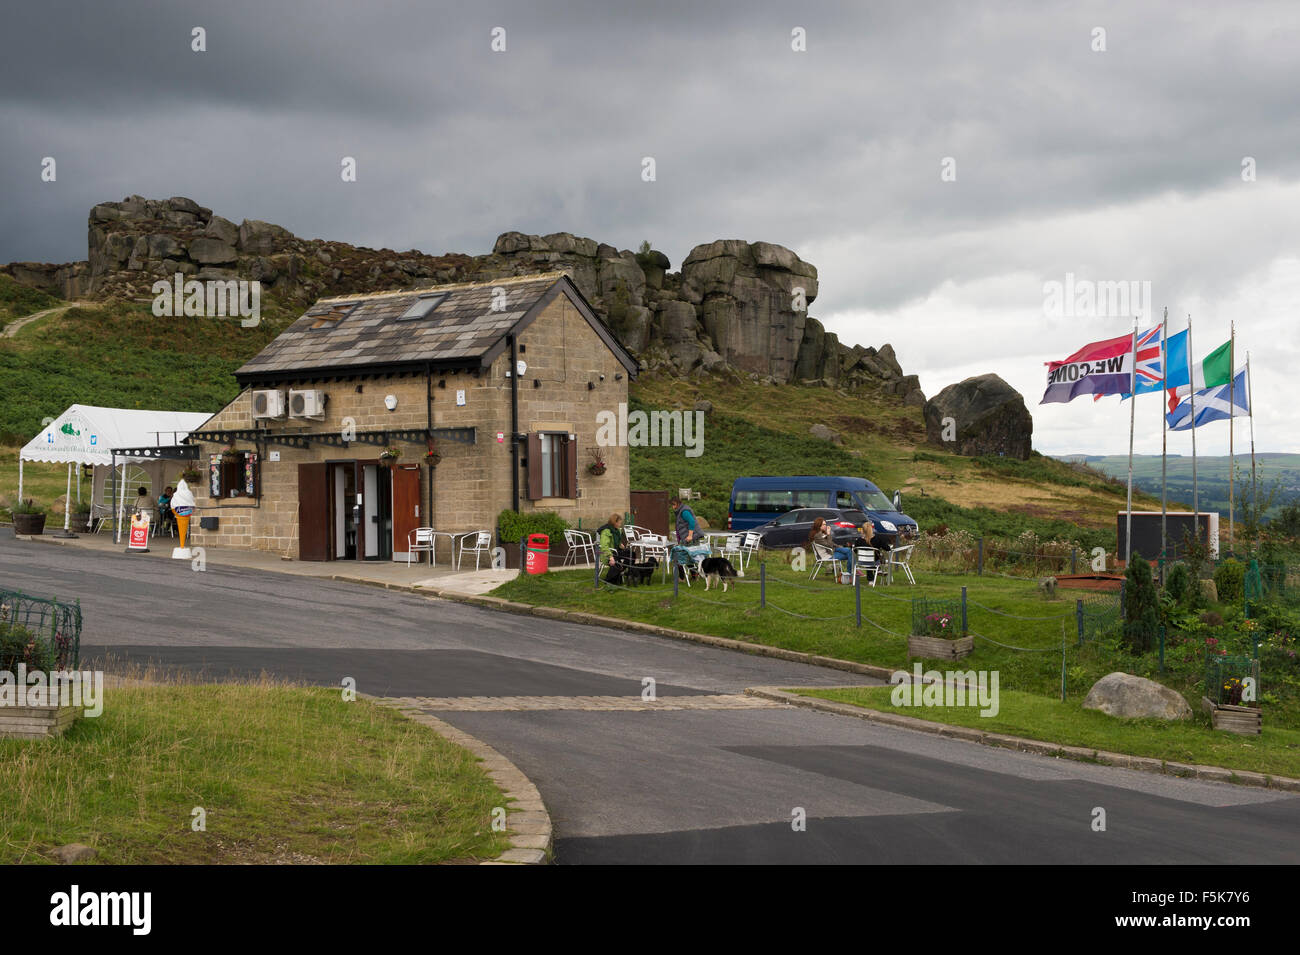 Dark grey clouds in sky over café & car park at the Cow and Calf Rocks, Ilkley, West Yorkshire, England, UK  - popular countryside visitor attraction. Stock Photo